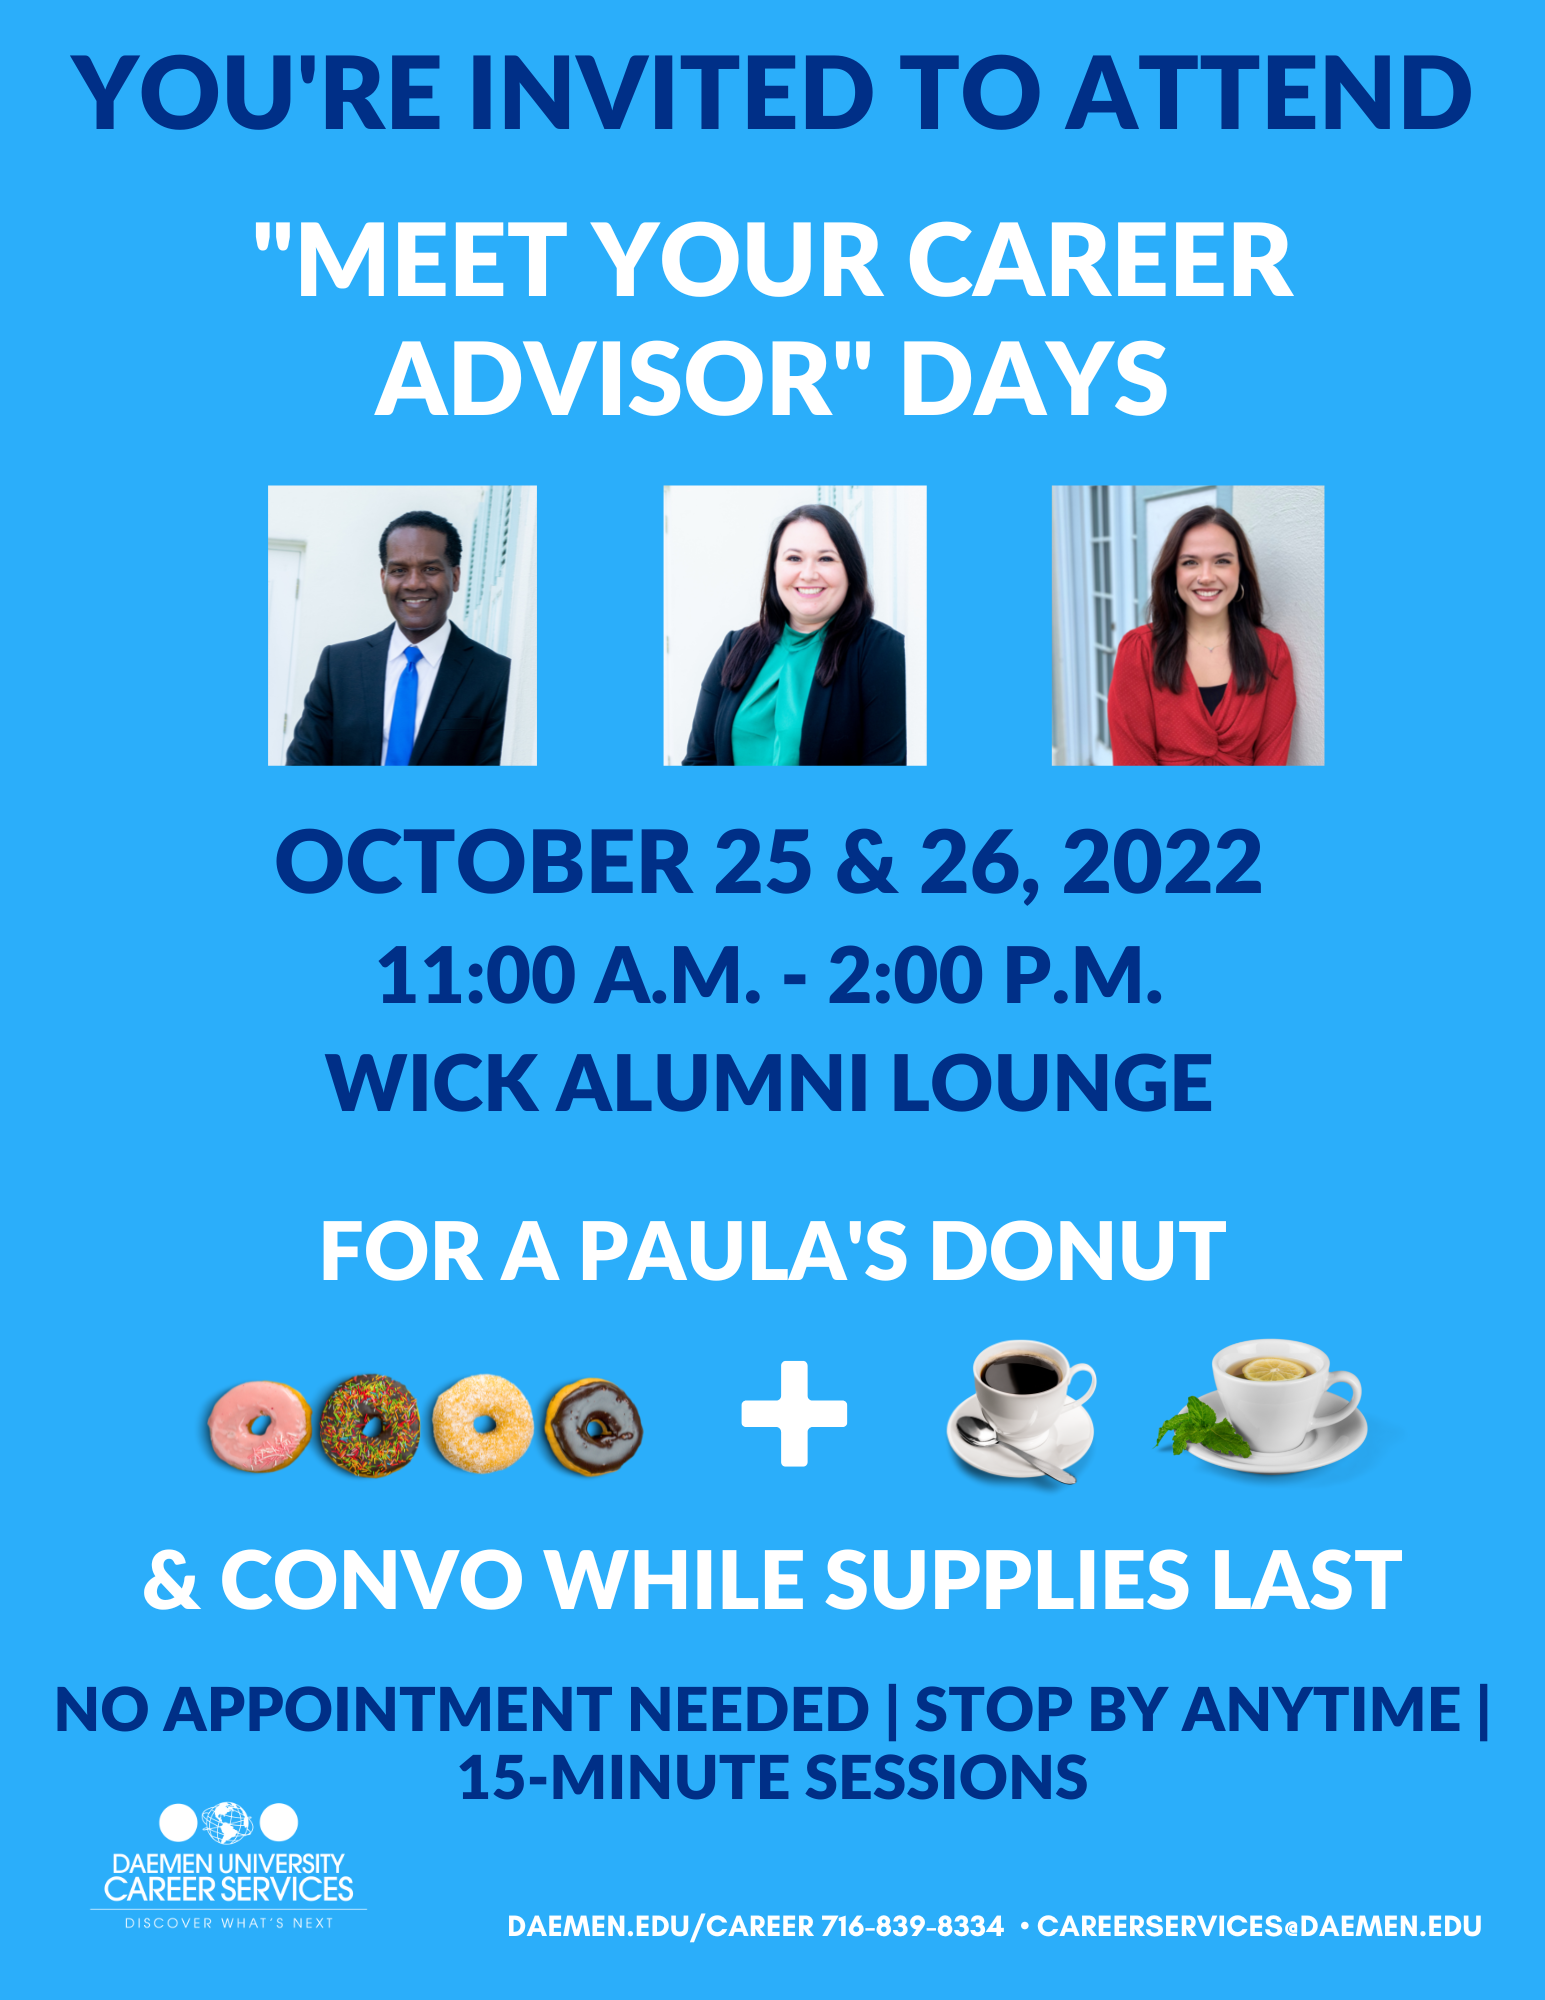 Meet Your Career Advisor Days-October 25 and 26, 2022 